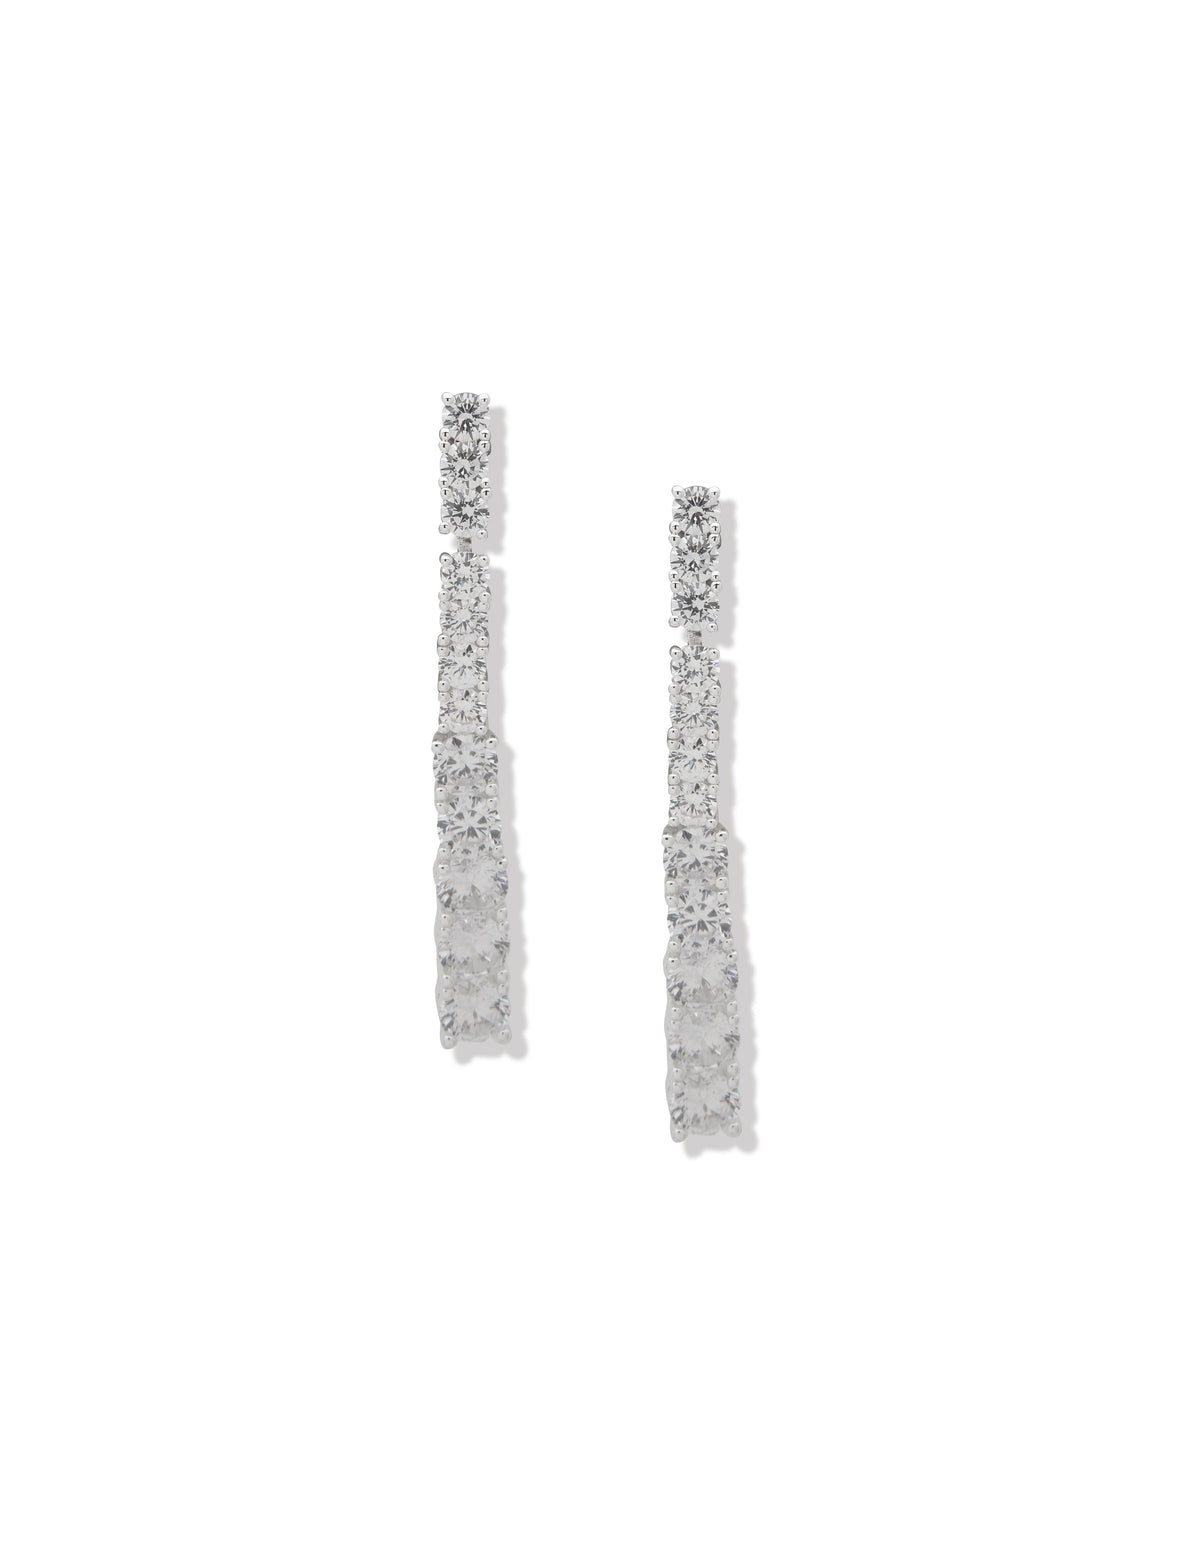 Anne Klein Silver-Tone Prong Round Stone Linear Earrings